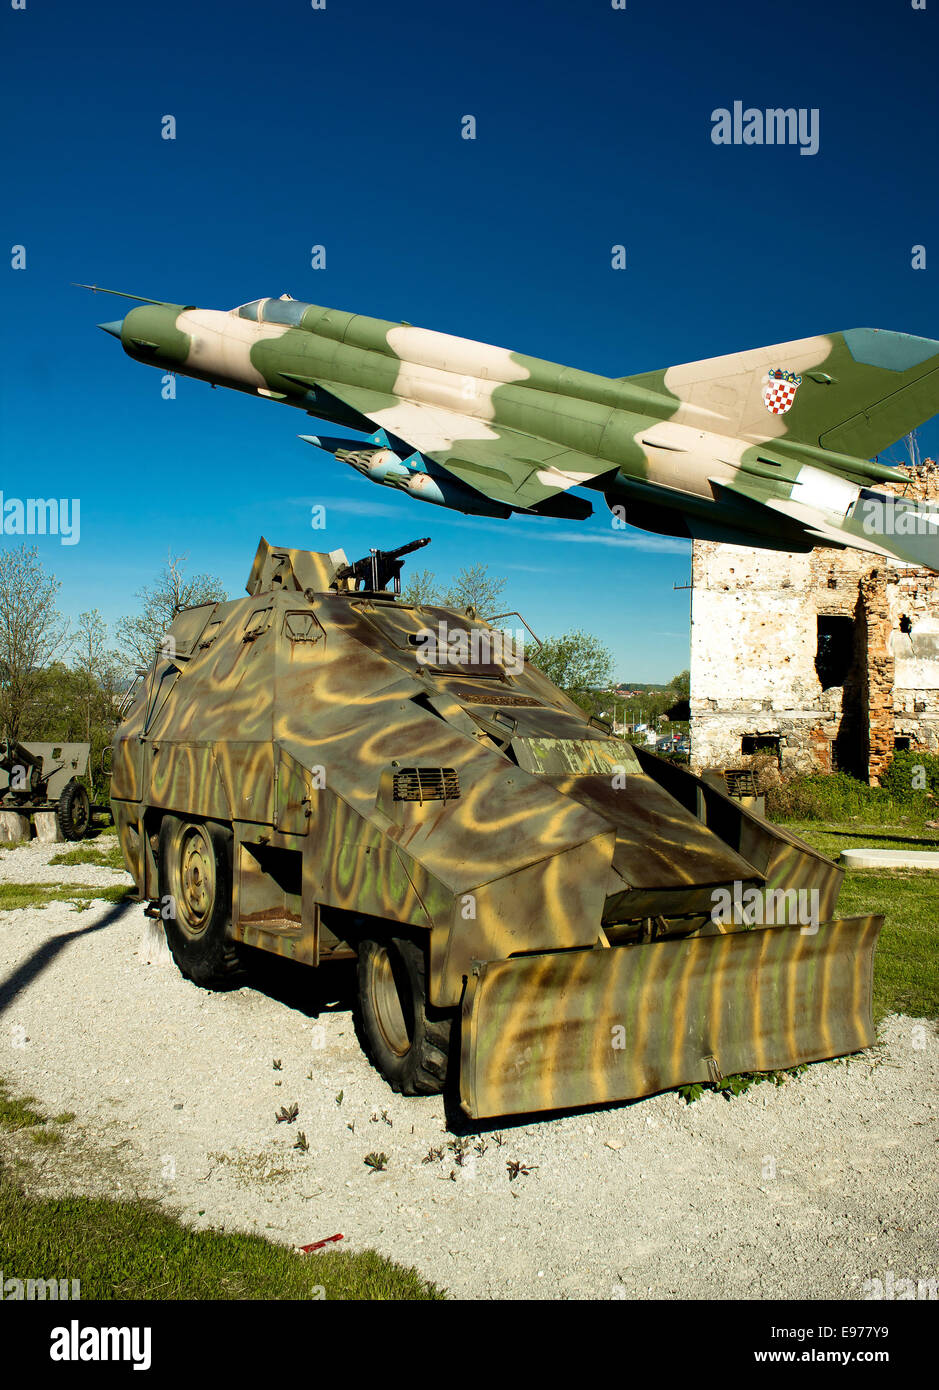 Military vehicle and MIG 21 airplane Stock Photo